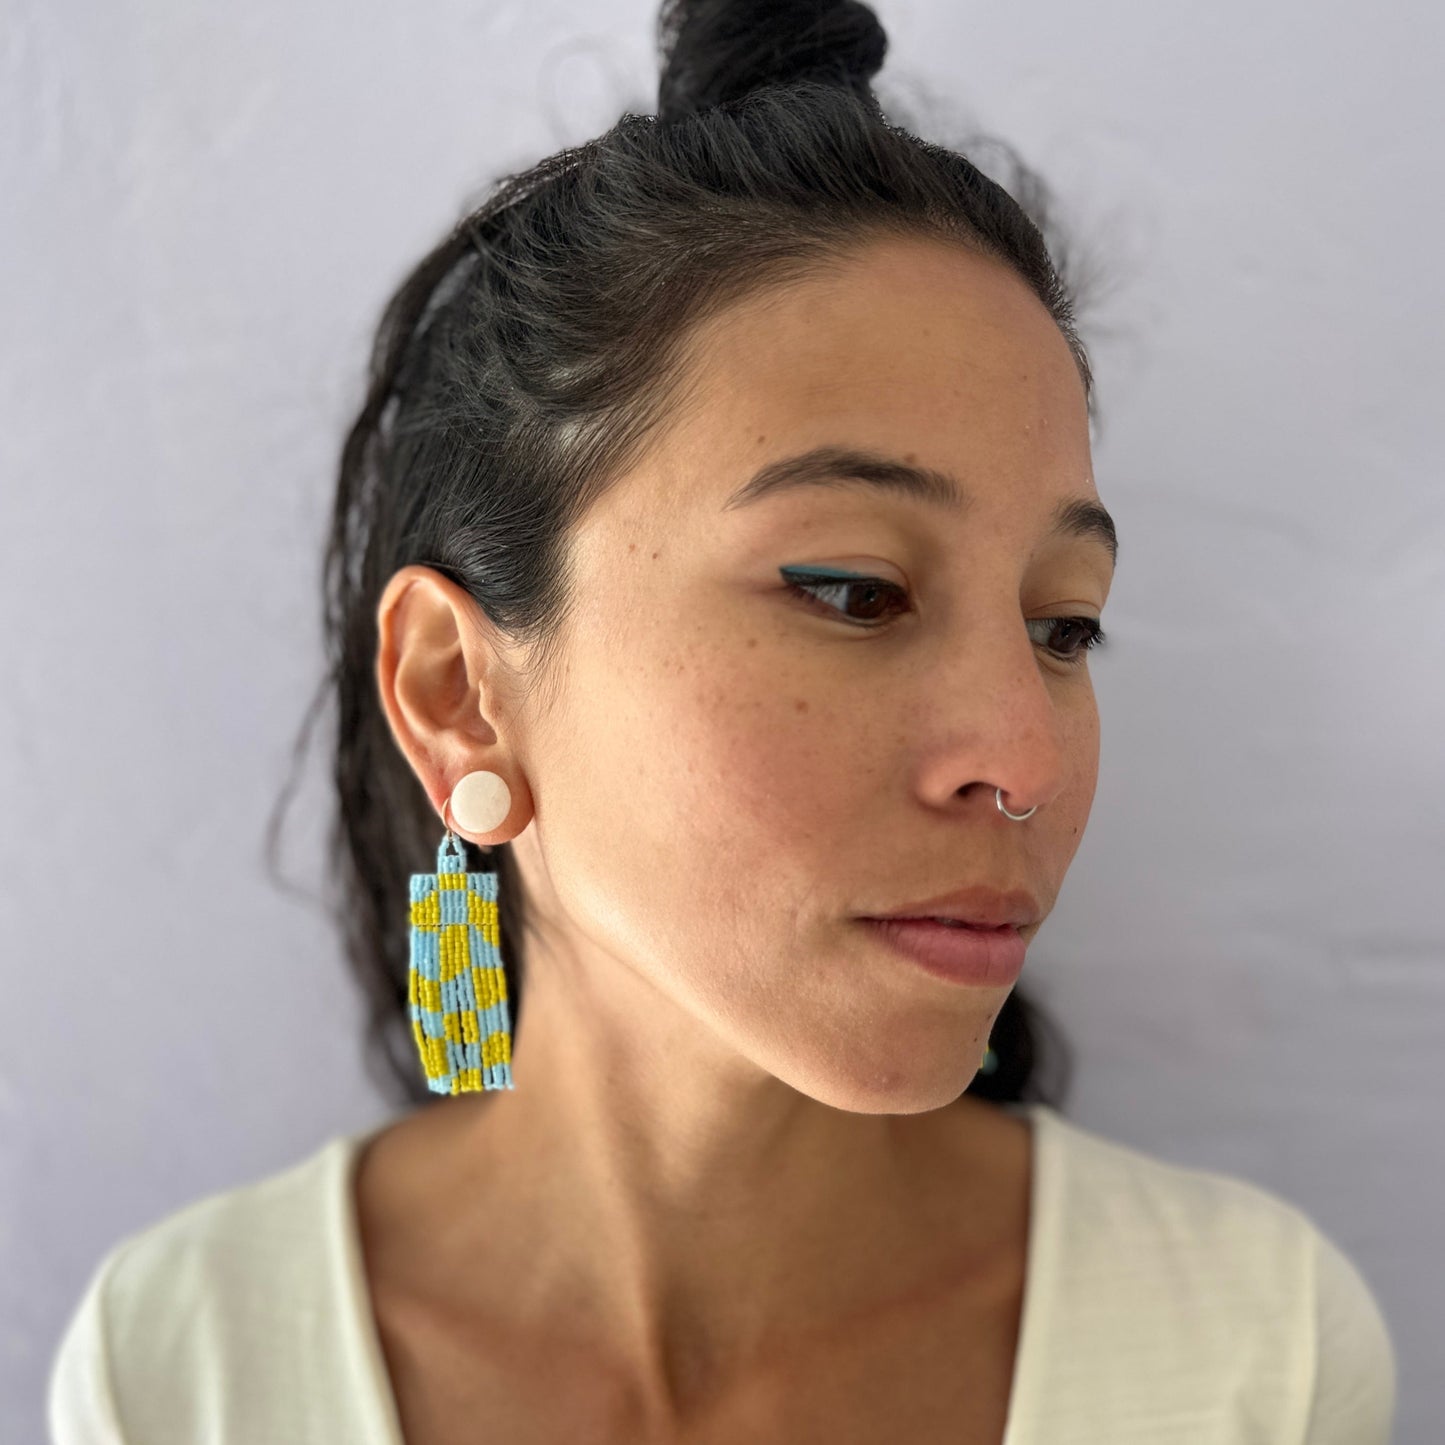 Wavy Checkered Beaded Earrings in Chartreuse & Blue